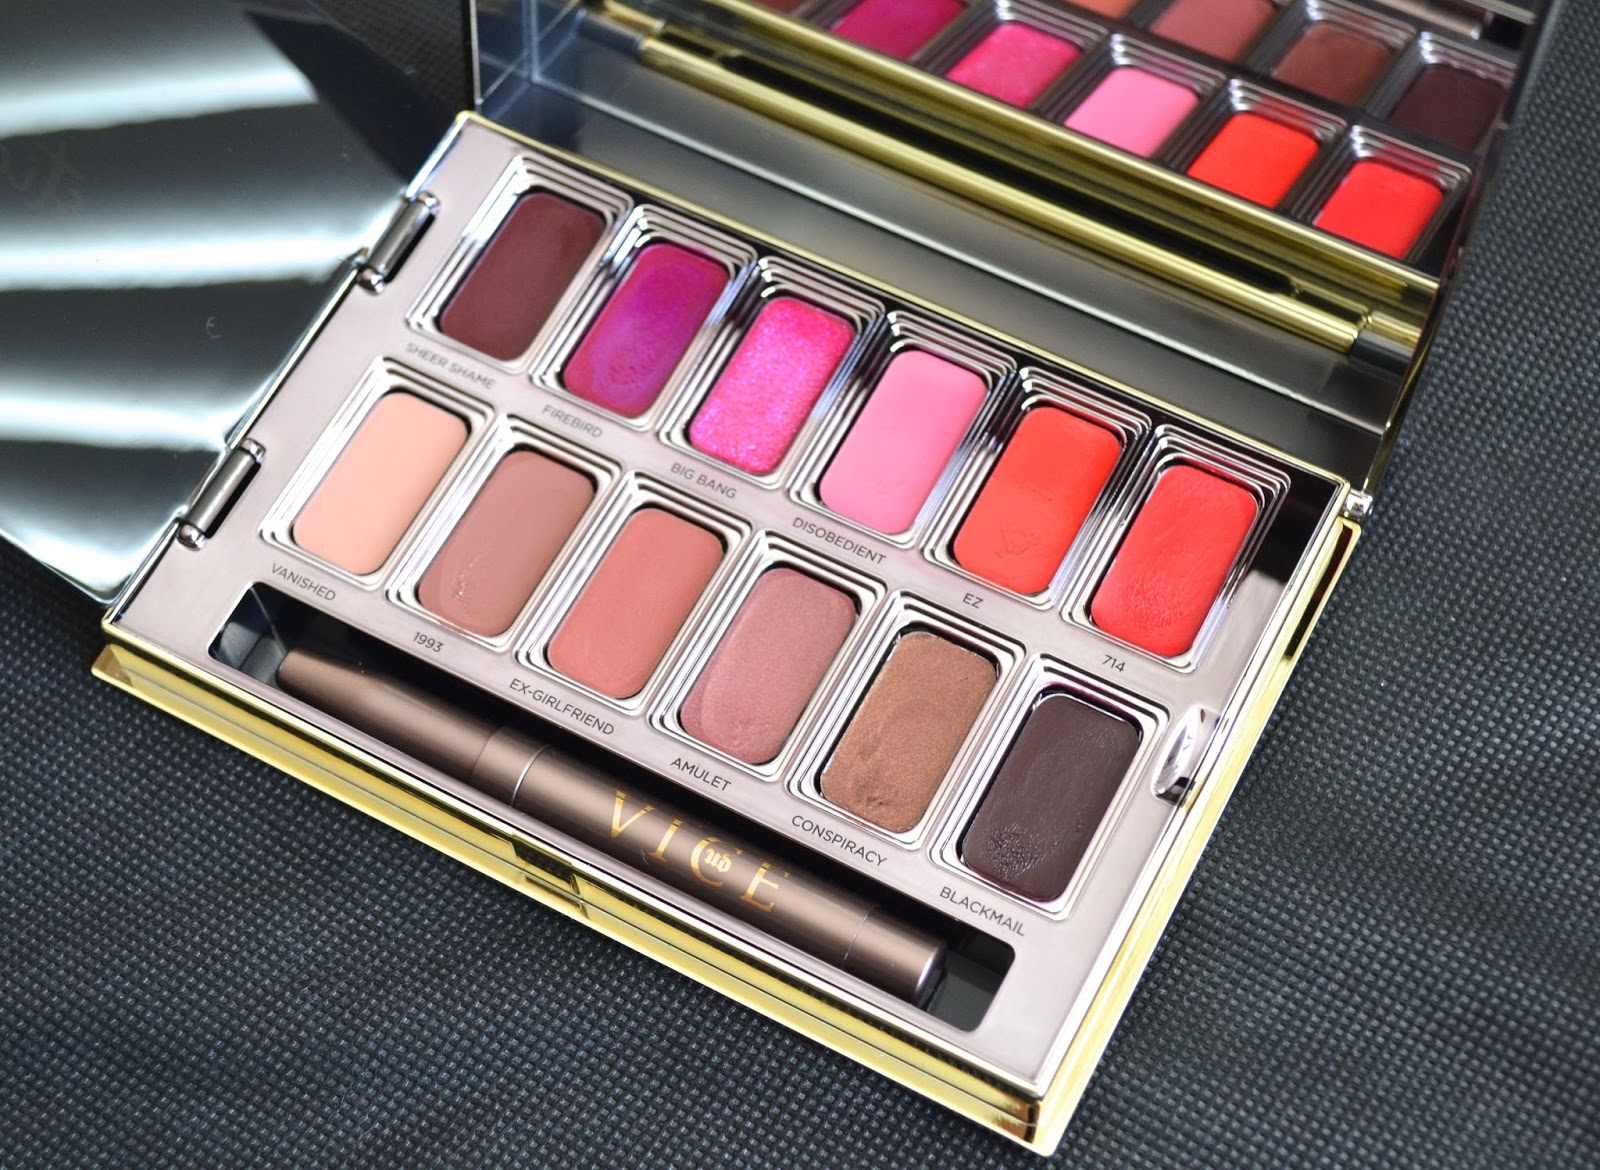 Urban Decay Blackmail Vice Lipstick Palette - Swatches and Review.